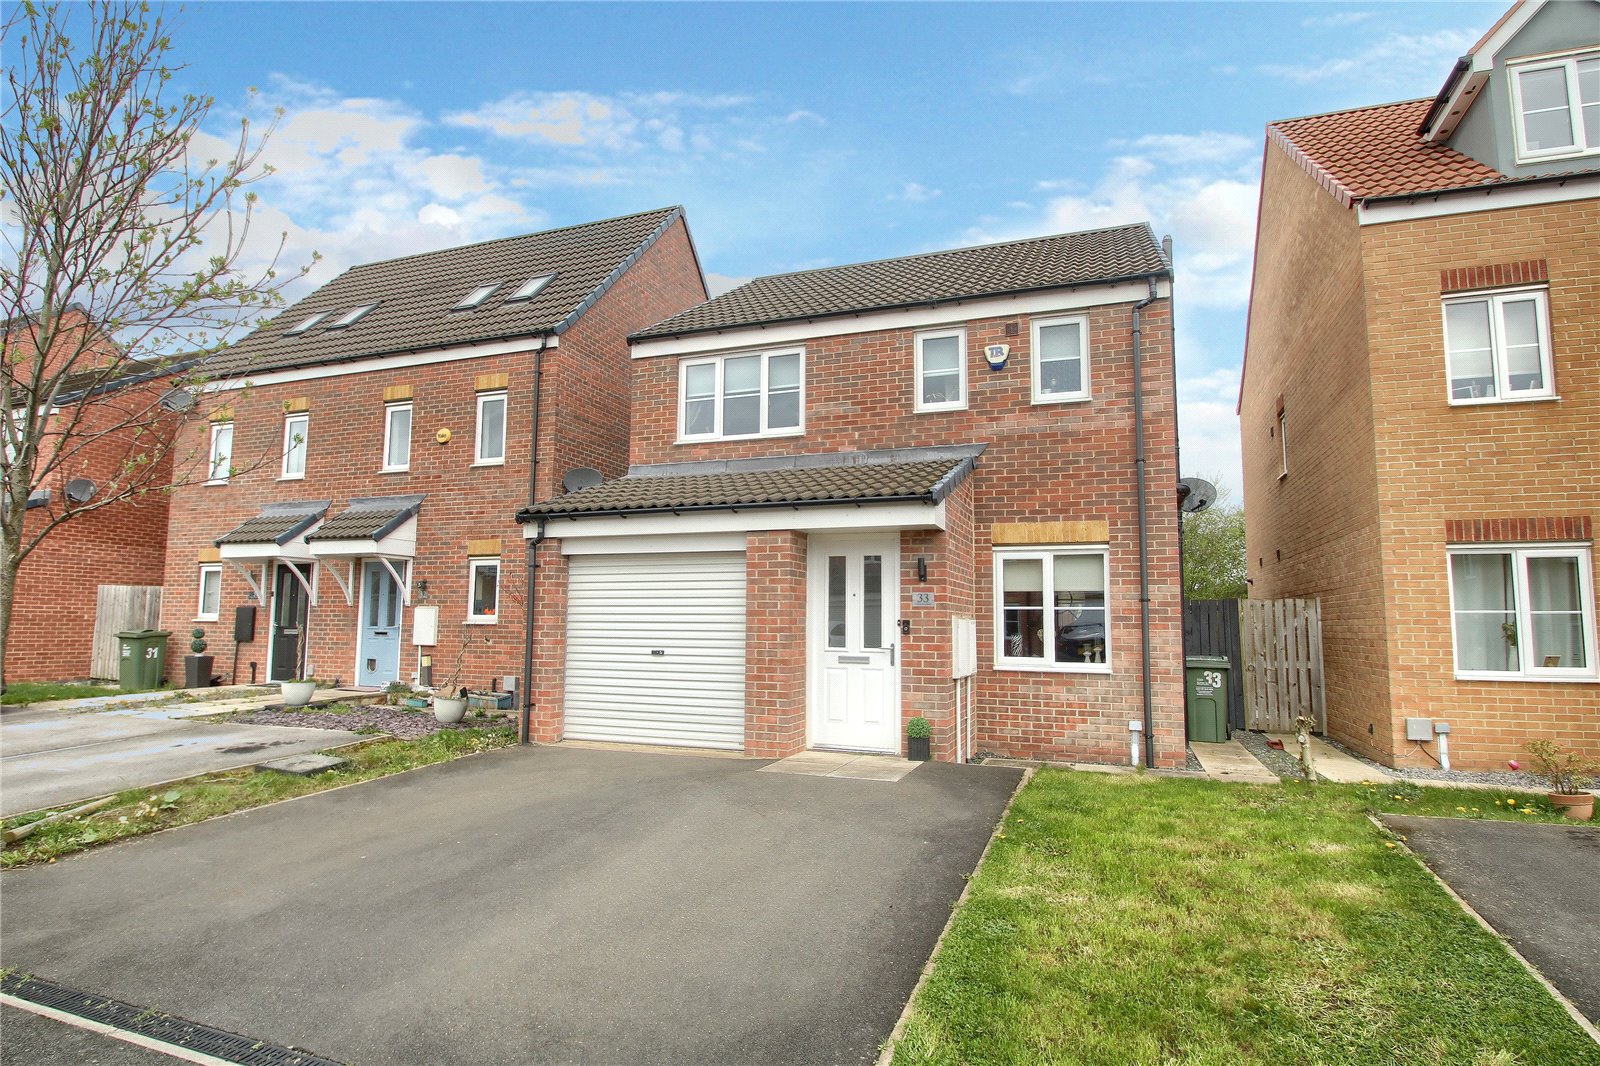 3 bed house for sale in Bancroft Drive, Ingleby Barwick 1